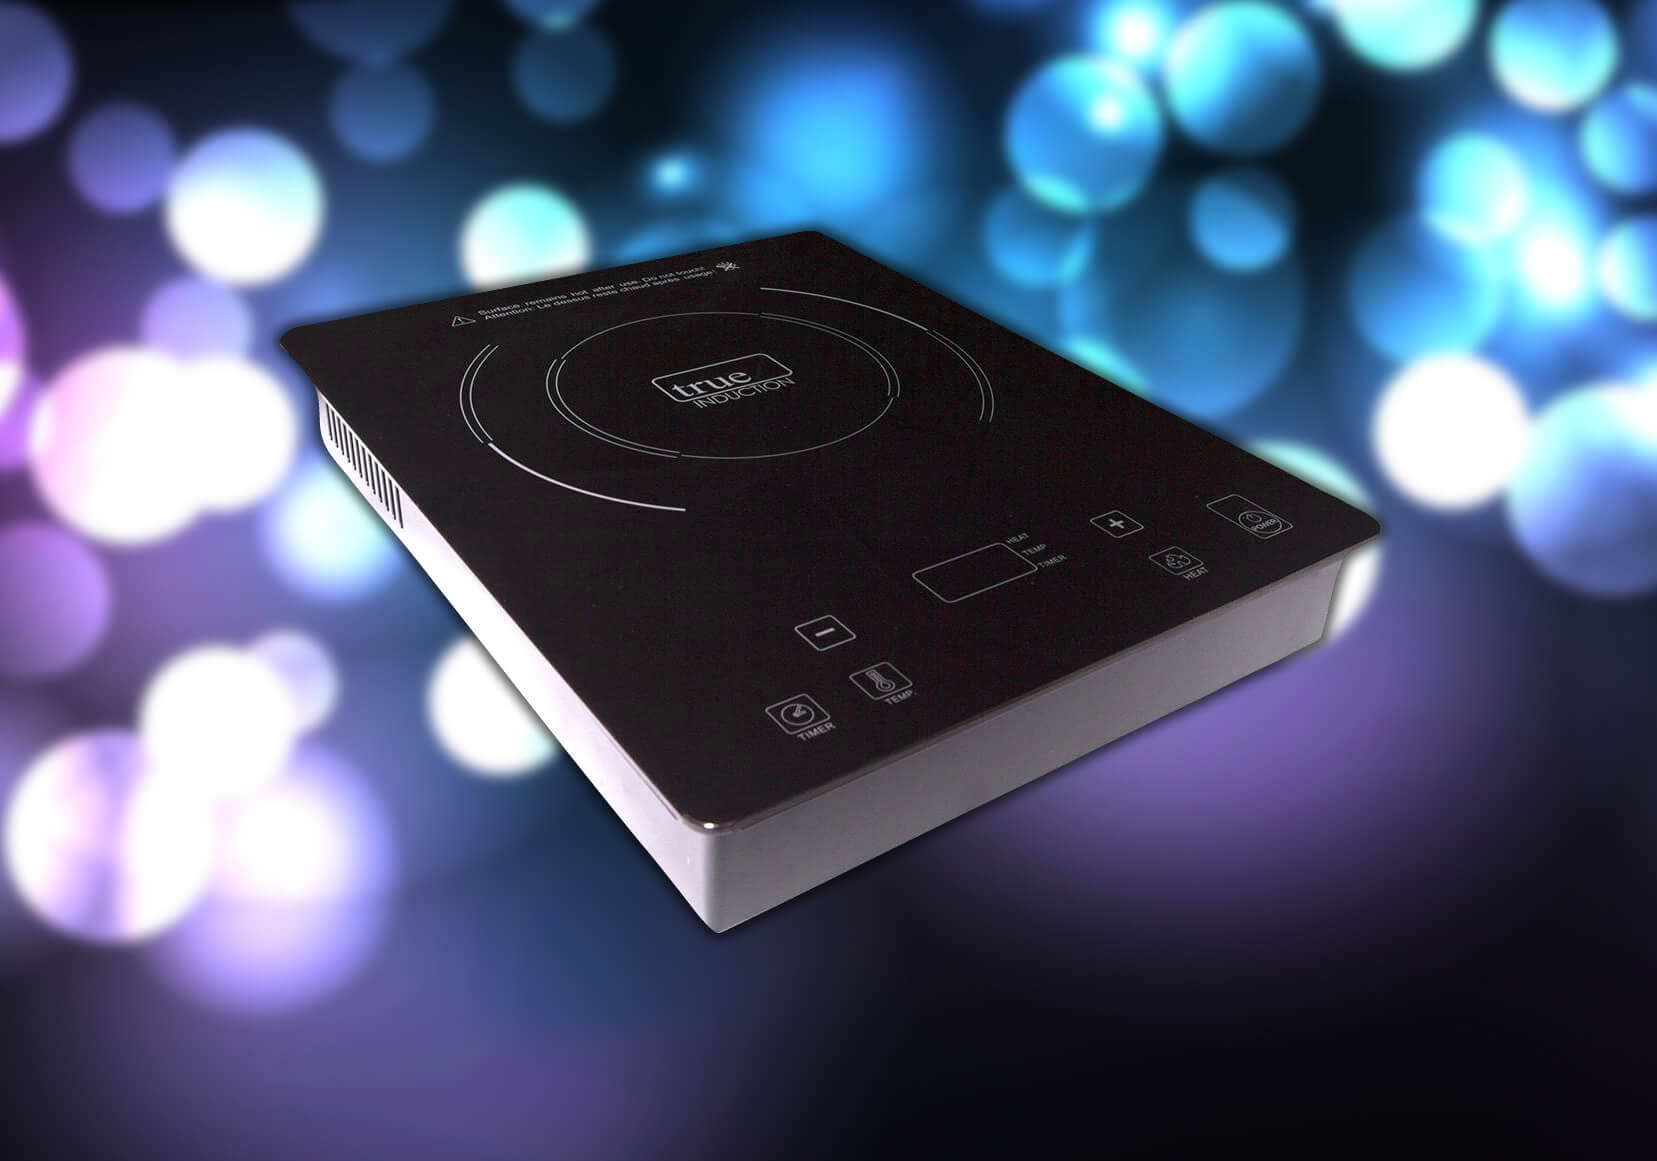 Our Single Transporter Energy induction hob as included in our Transporter Energy System